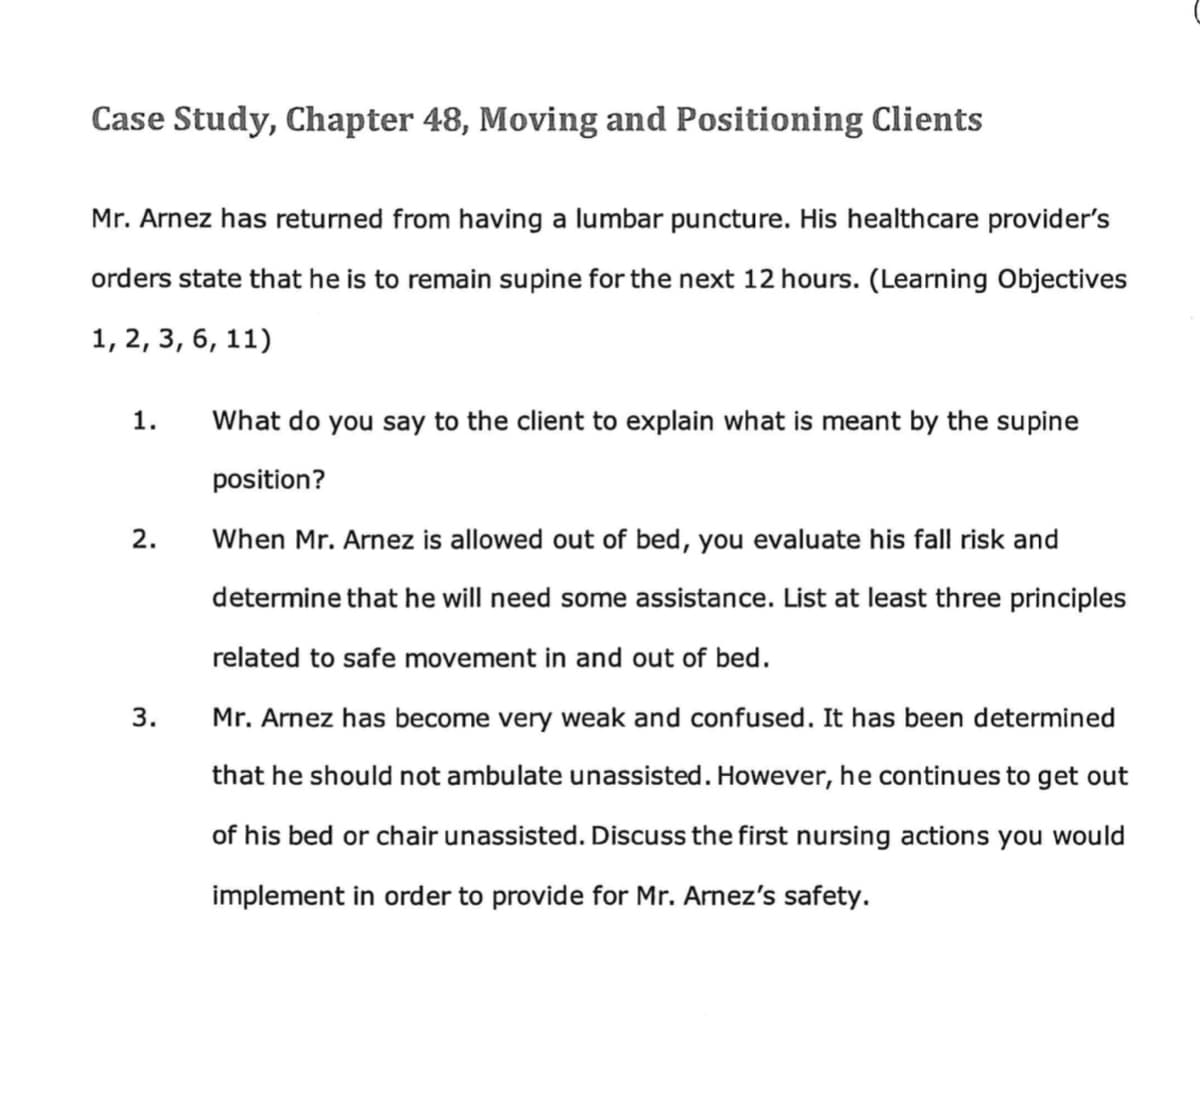 Case Study, Chapter 48, Moving and Positioning Clients
Mr. Arnez has returned from having a lumbar puncture. His health care provider's
orders state that he is to remain supine for the next 12 hours. (Learning Objectives
1, 2, 3, 6, 11)
1.
2.
3.
What do you say to the client to explain what is meant by the supine
position?
When Mr. Arnez is allowed out of bed, you evaluate his fall risk and
determine that he will need some assistance. List at least three principles
related to safe movement in and out of bed.
Mr. Arnez has become very weak and confused. It has been determined
that he should not ambulate unassisted. However, he continues to get out
of his bed or chair unassisted. Discuss the first nursing actions you would
implement in order to provide for Mr. Arnez's safety.